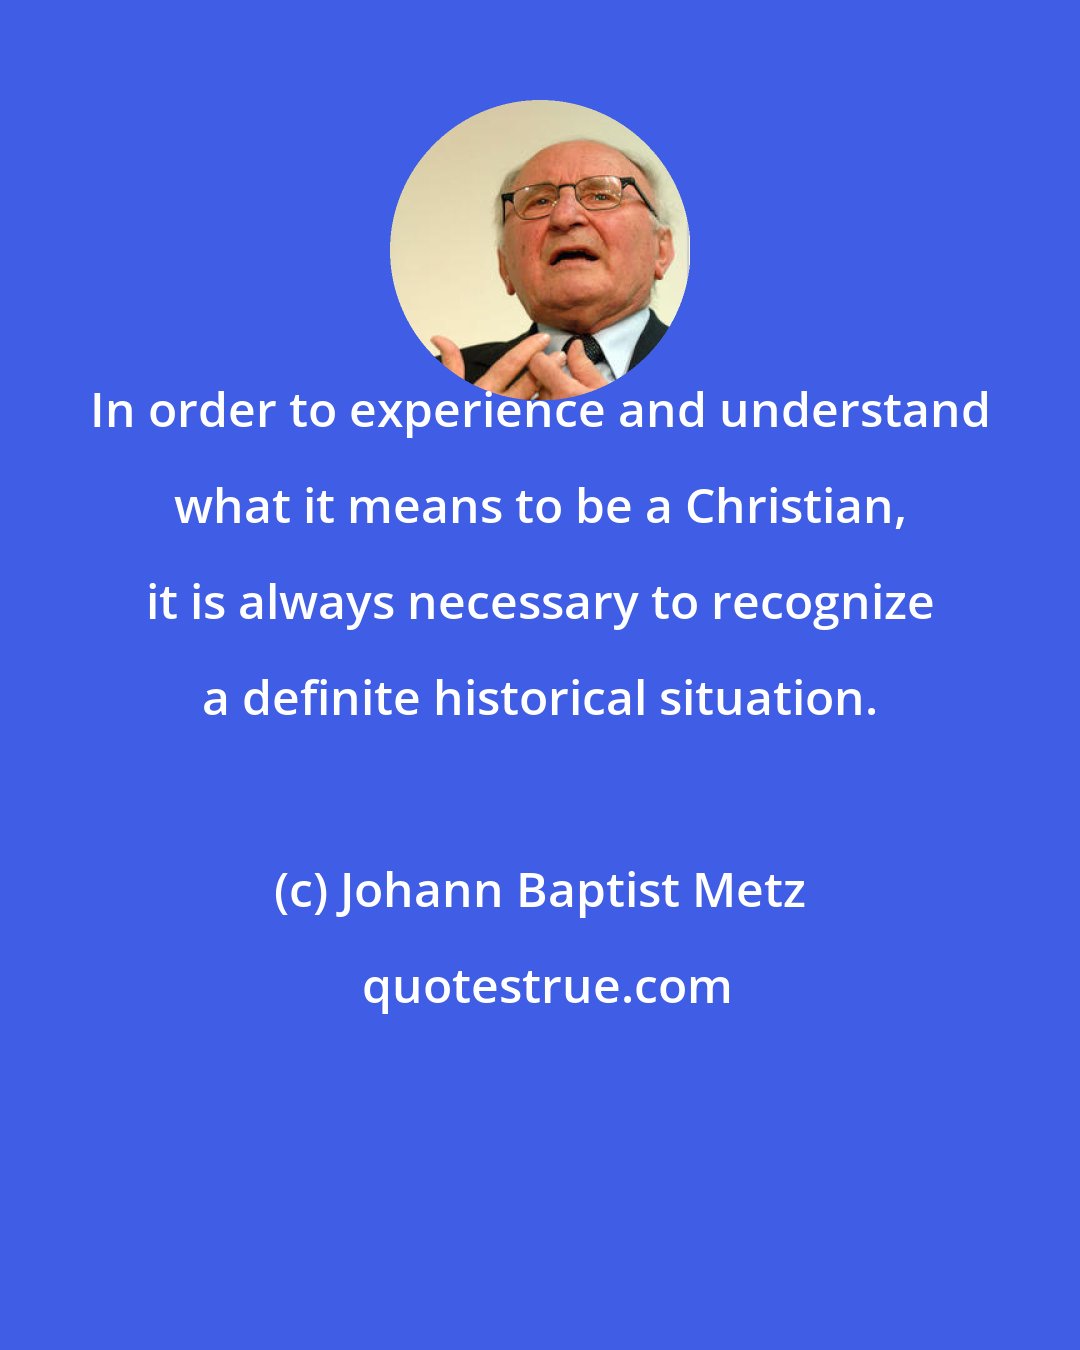 Johann Baptist Metz: In order to experience and understand what it means to be a Christian, it is always necessary to recognize a definite historical situation.